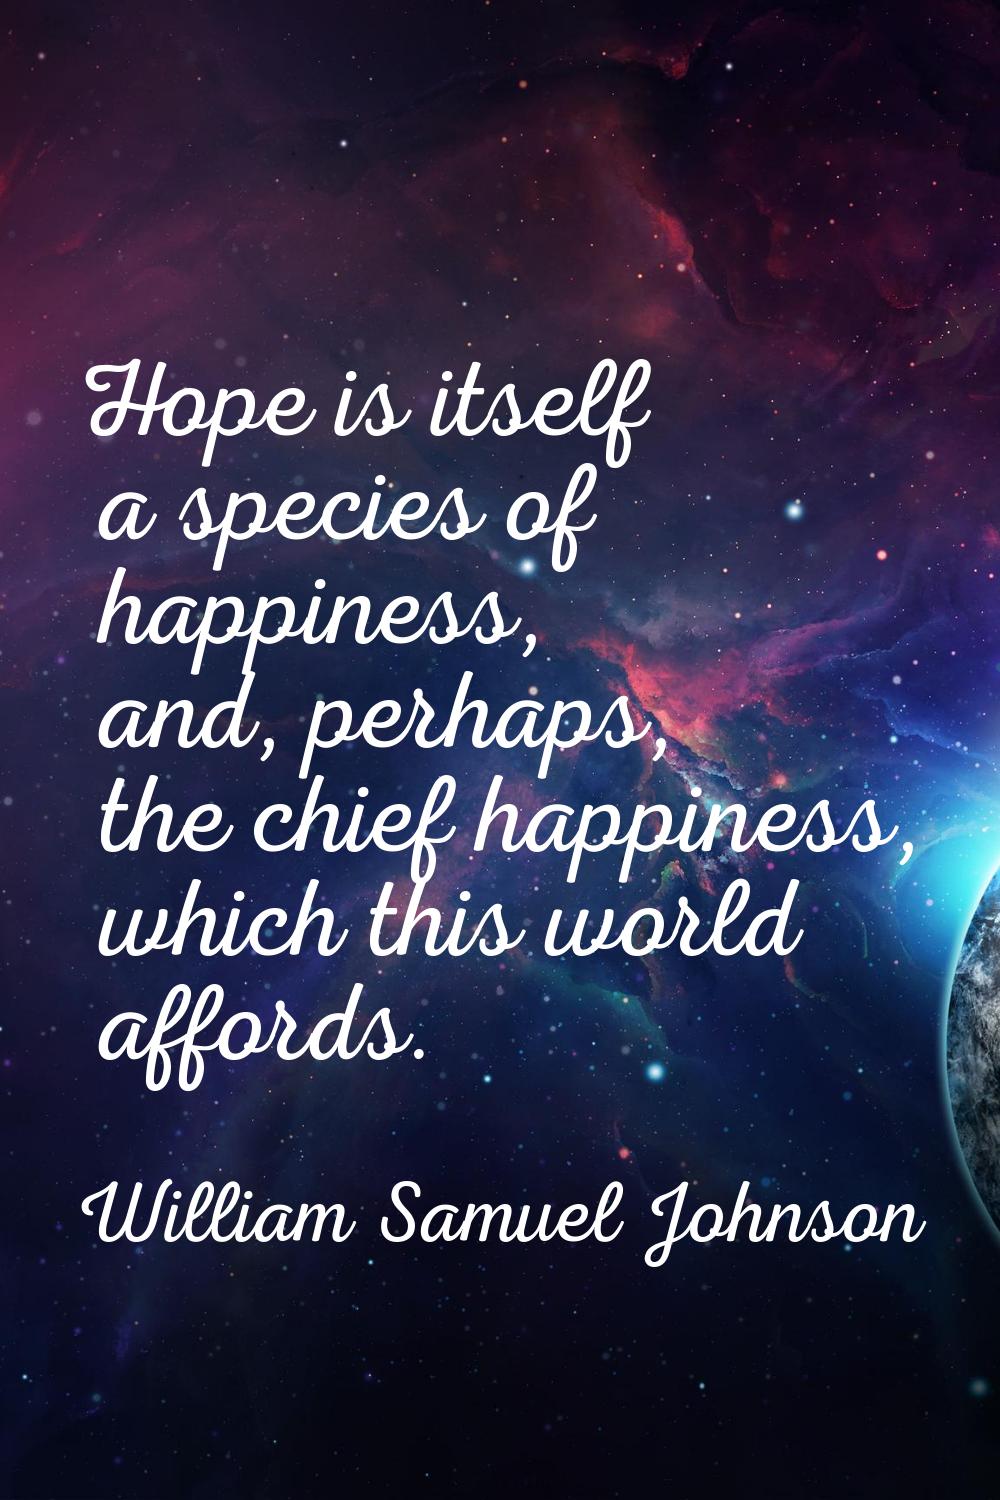 Hope is itself a species of happiness, and, perhaps, the chief happiness, which this world affords.